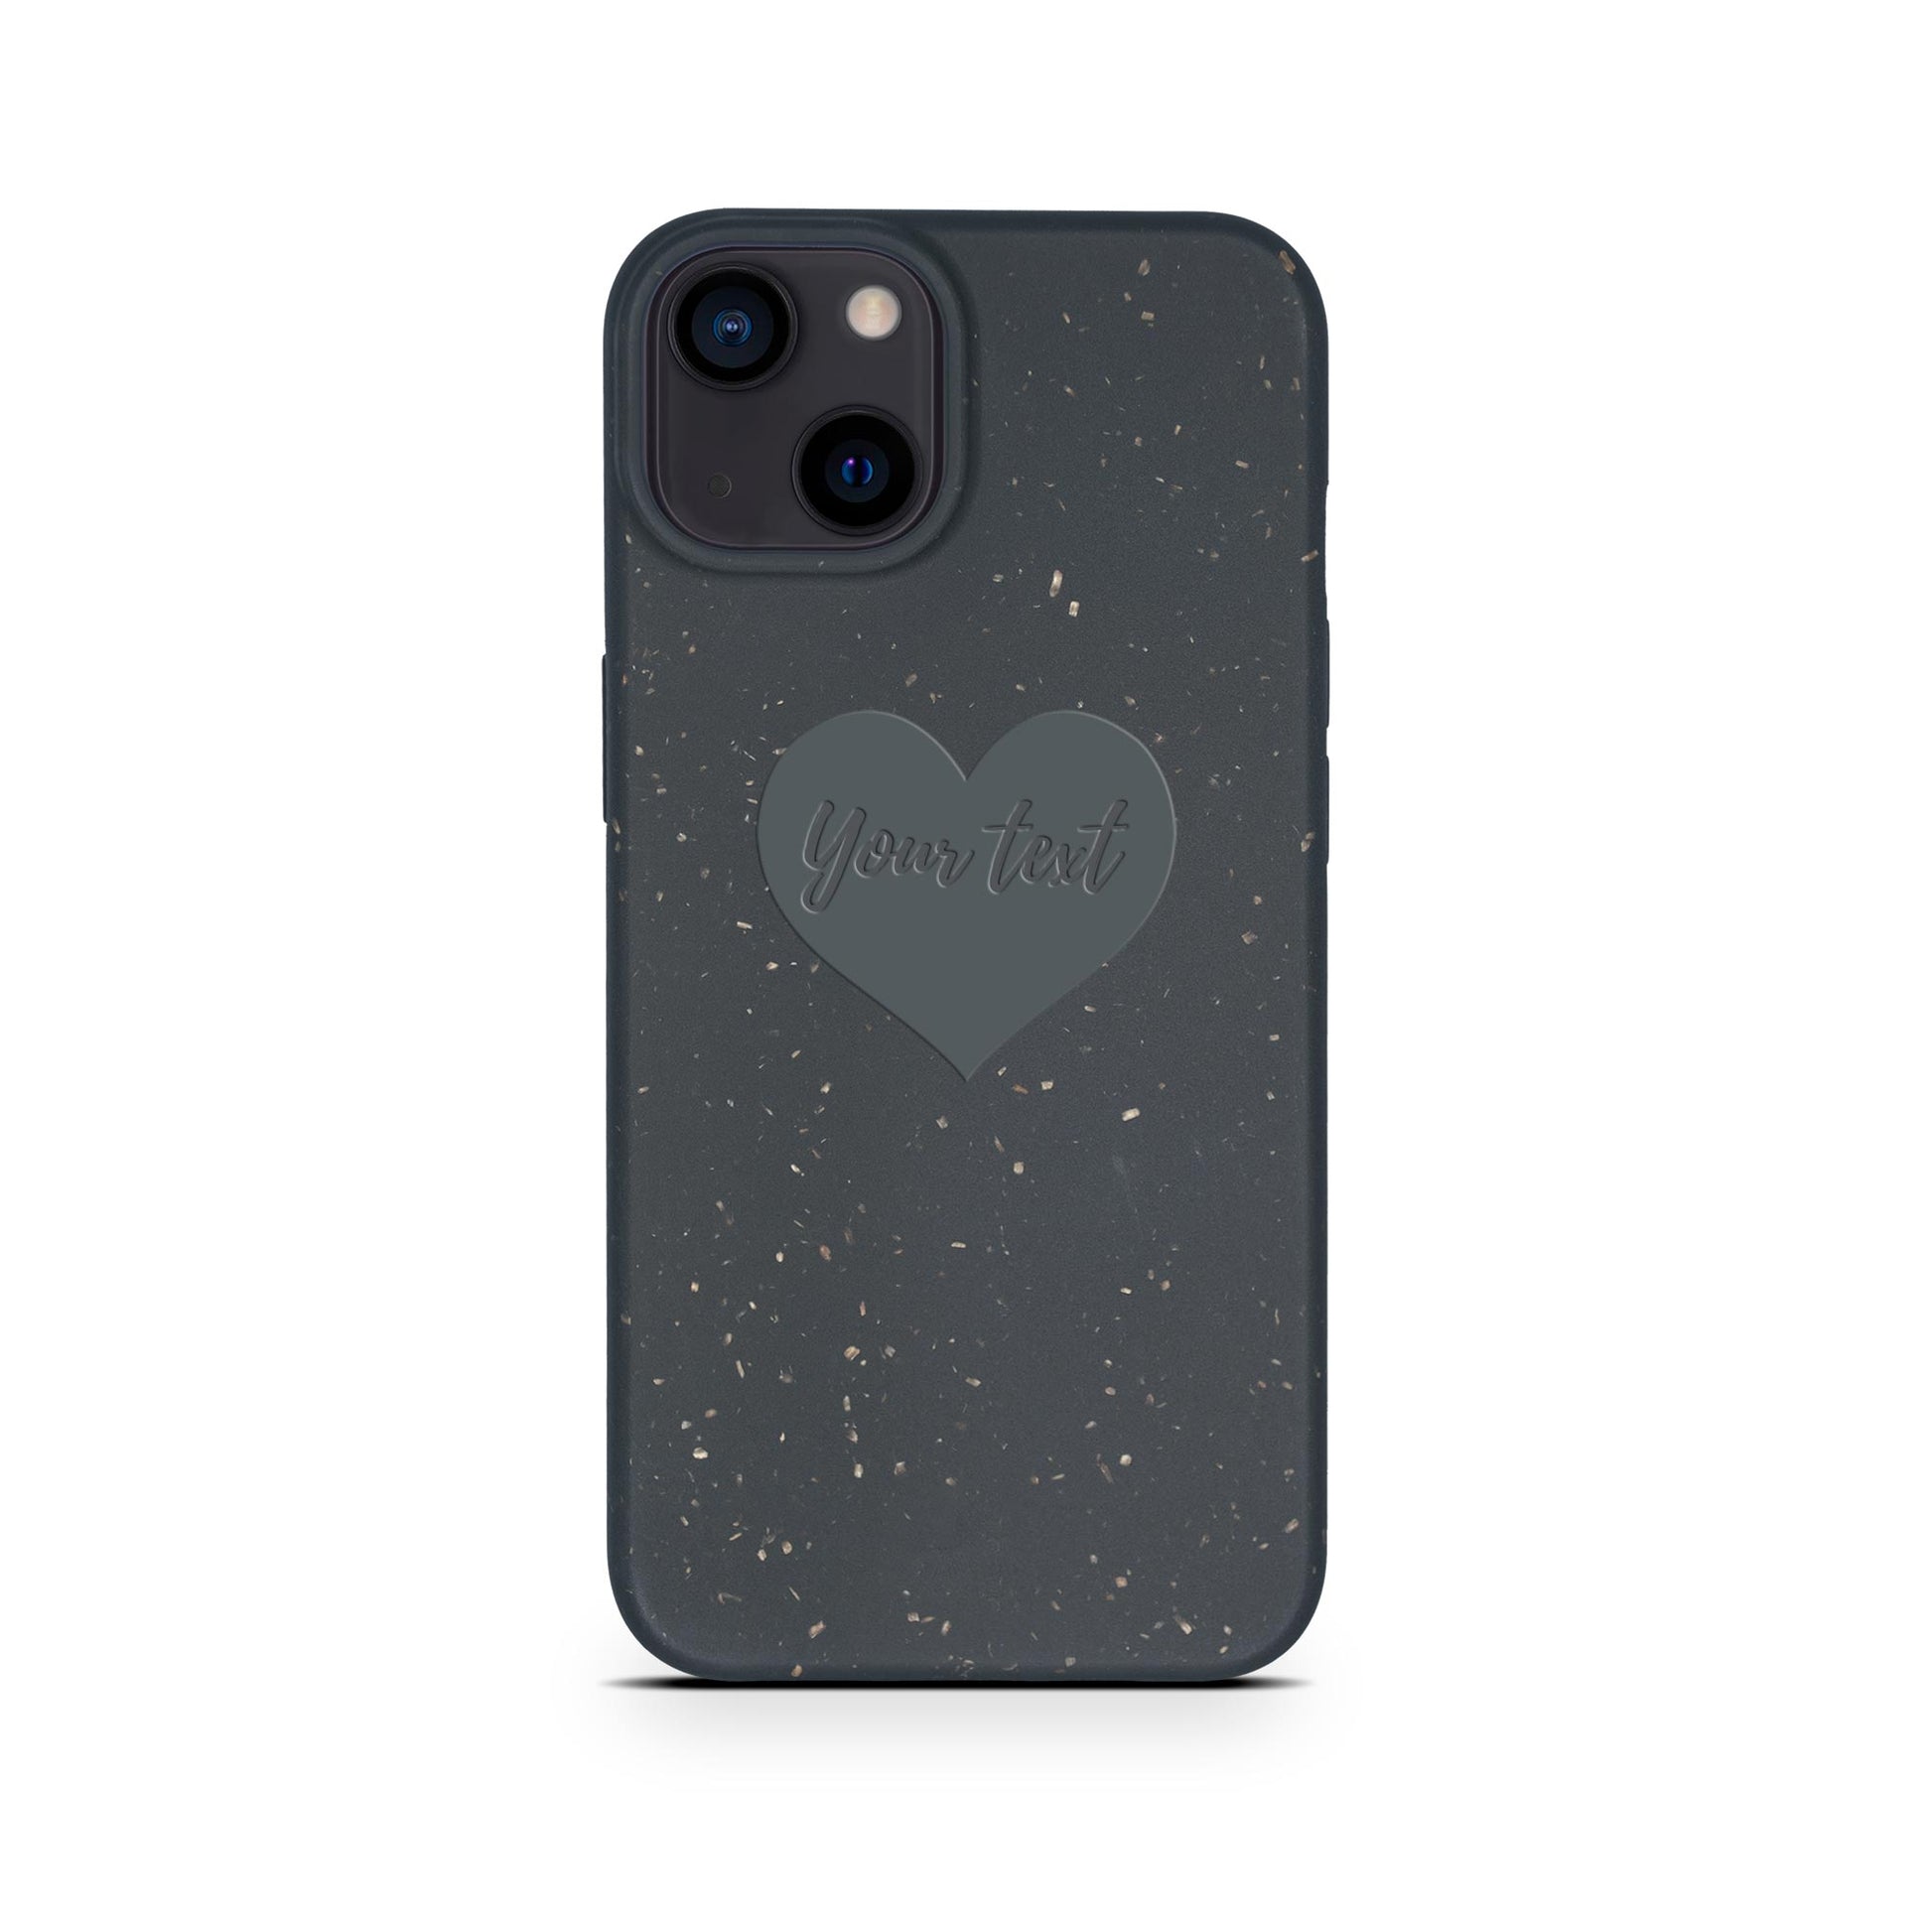 Biodegradable Personalized Tan Lily iPhone Case featuring a black speckled design and a central heart-shaped cutout with the text "Your text" on it, designed for dual-lens camera models.